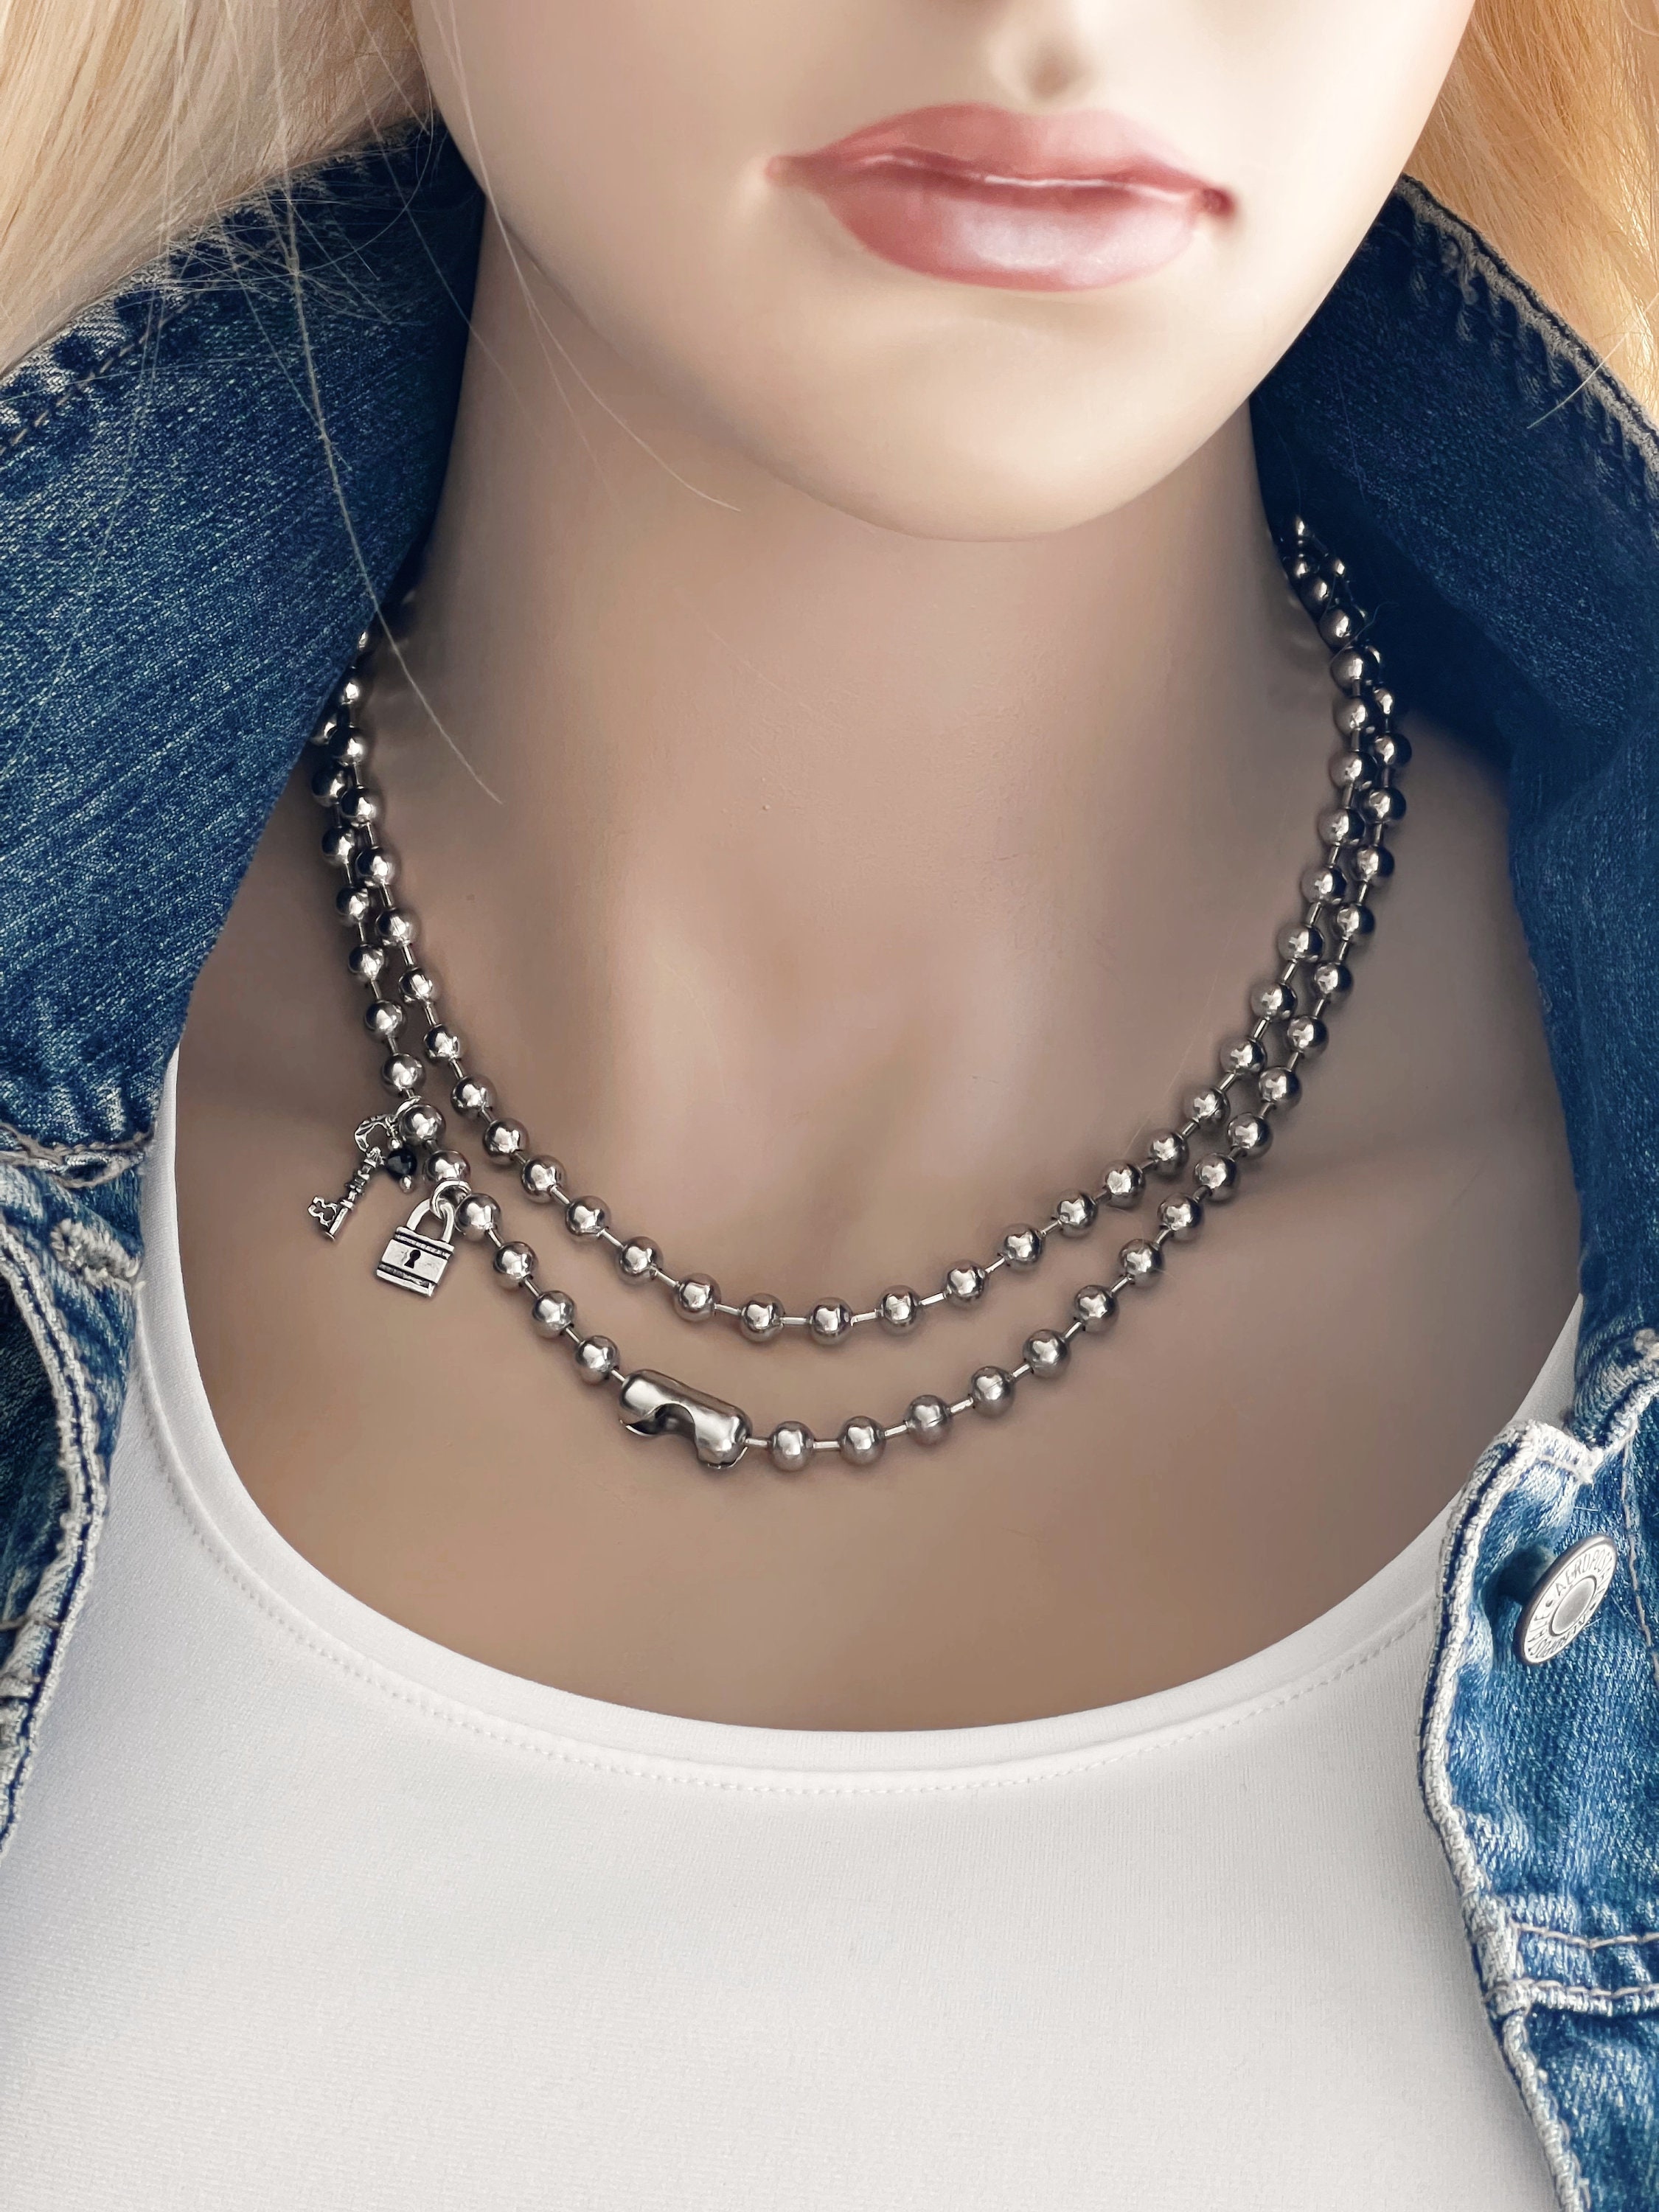 Silver Oxidized Chain Necklace, Link Chain Necklace, Chunky Chain Necklace,  Women's Men Bold Choker Necklace, Biker Wristband - Etsy | Chunky silver  necklace, Chunky chain necklaces, Necklace